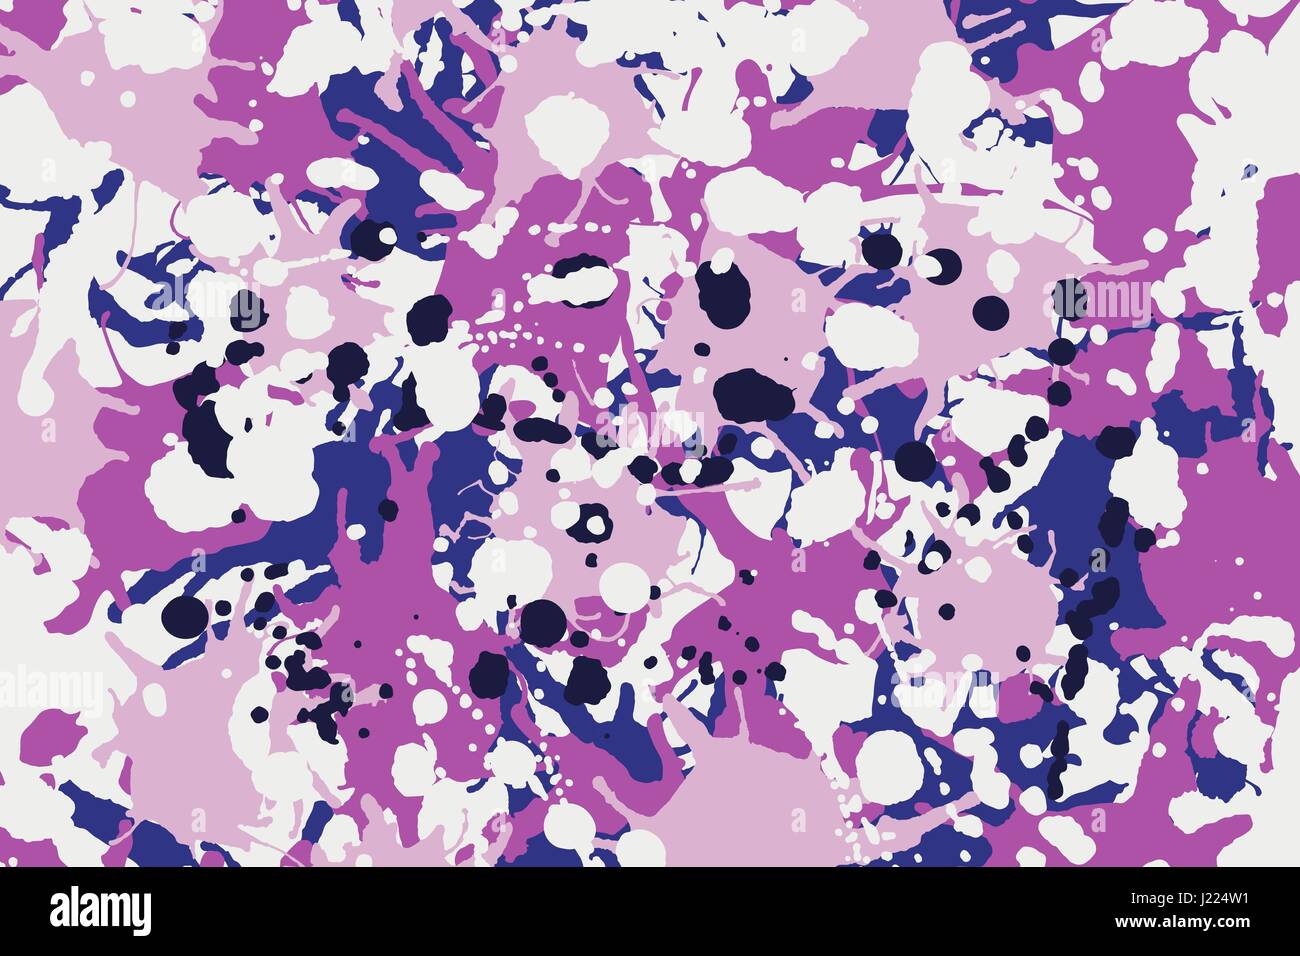 Blue pink shades ink paint splashes vector colorful background Stock Vector